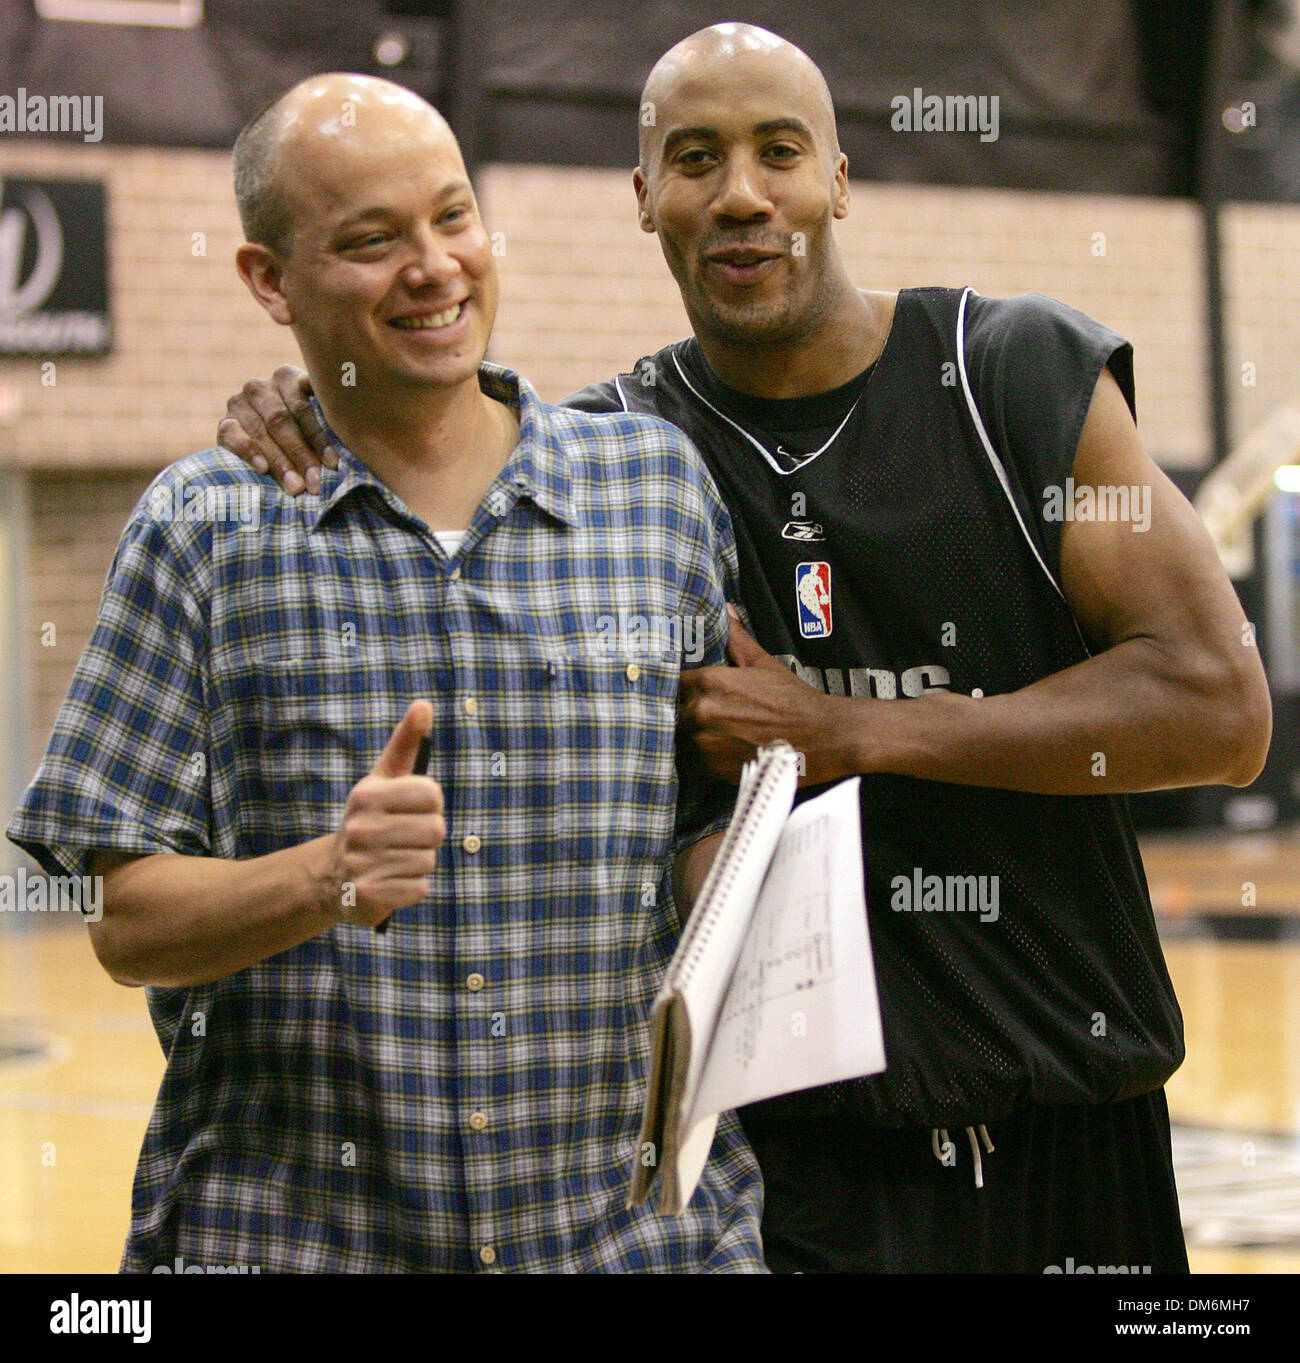 Jun 07, 2005; San Antonio, TX, USA;San Antonio Spurs Manu Ginobili takes  one last shot before heading to the weight room after practice on Tuesday,  June 7, 2005. Mandatory Credit: Photo by